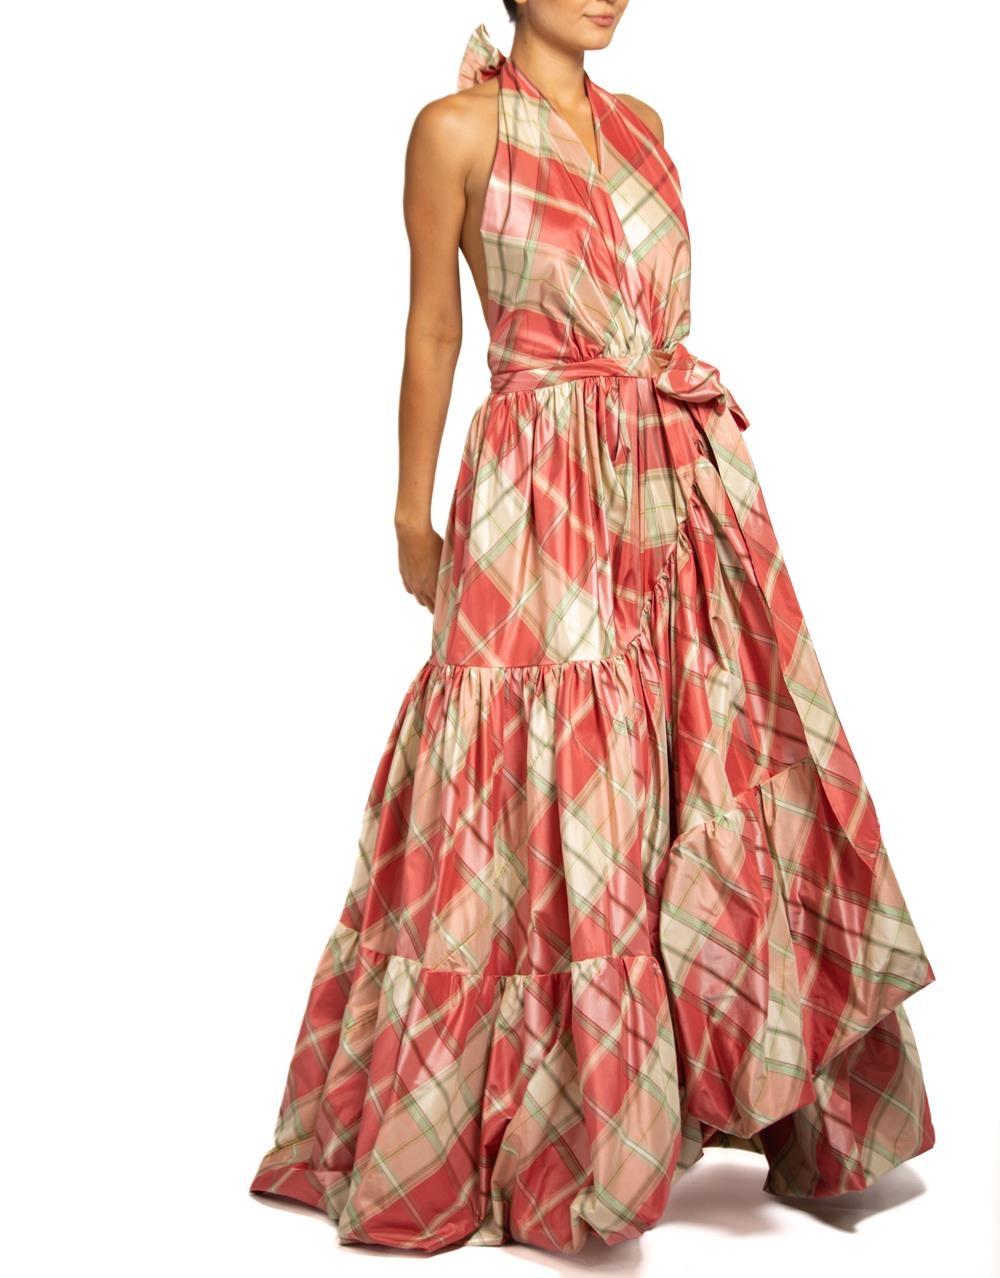 MORPHEW COLLECTION Pink & Aqua Silk Taffeta Plaid Gown MASTER In Excellent Condition For Sale In New York, NY